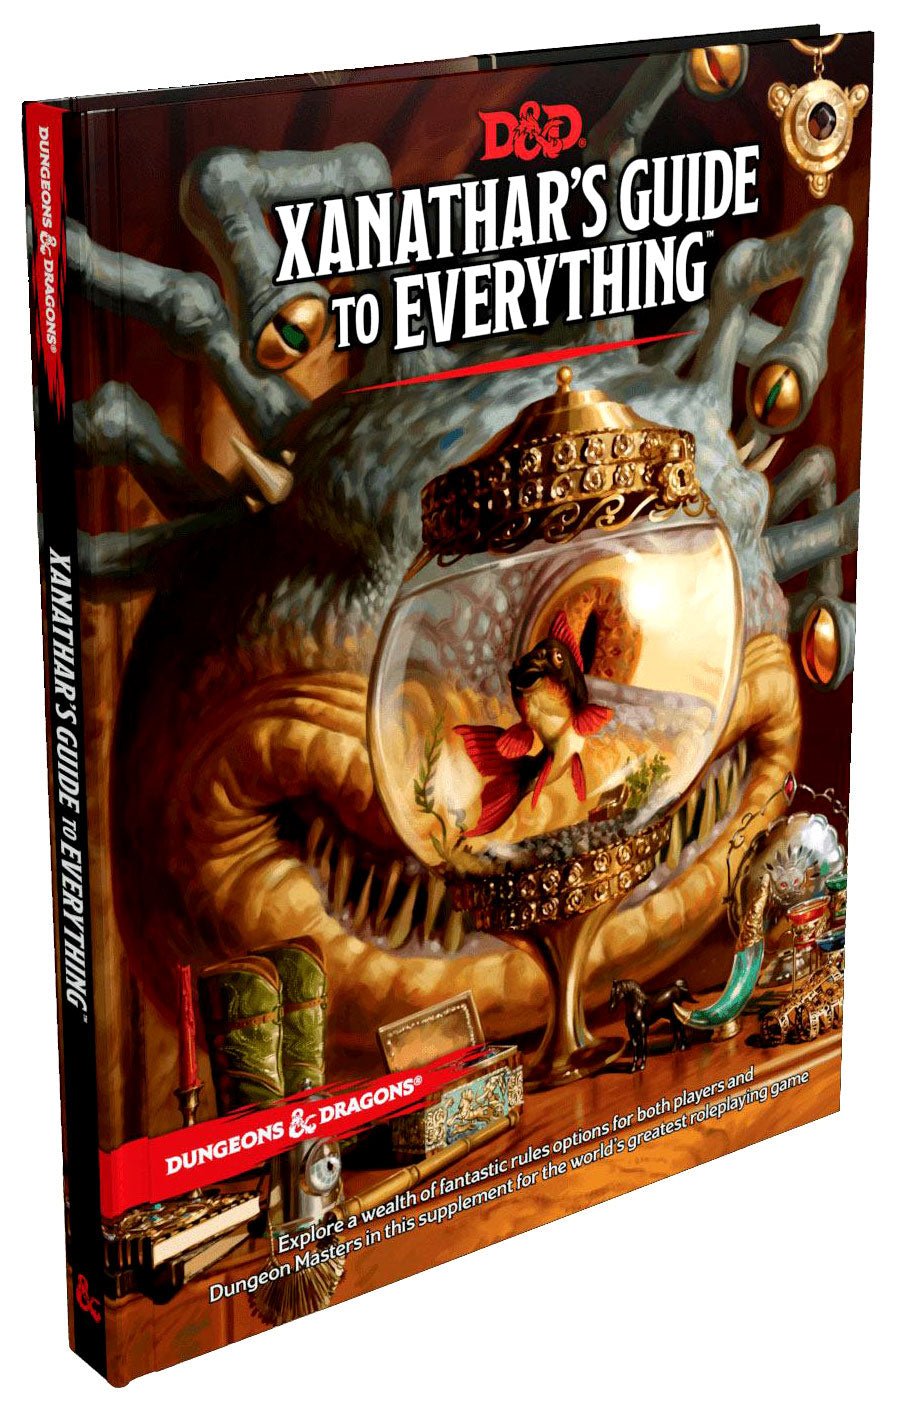 Dungeons and Dragons RPG: Xanathar's Guide to Everything from WIZARDS OF THE COAST, INC at The Compleat Strategist